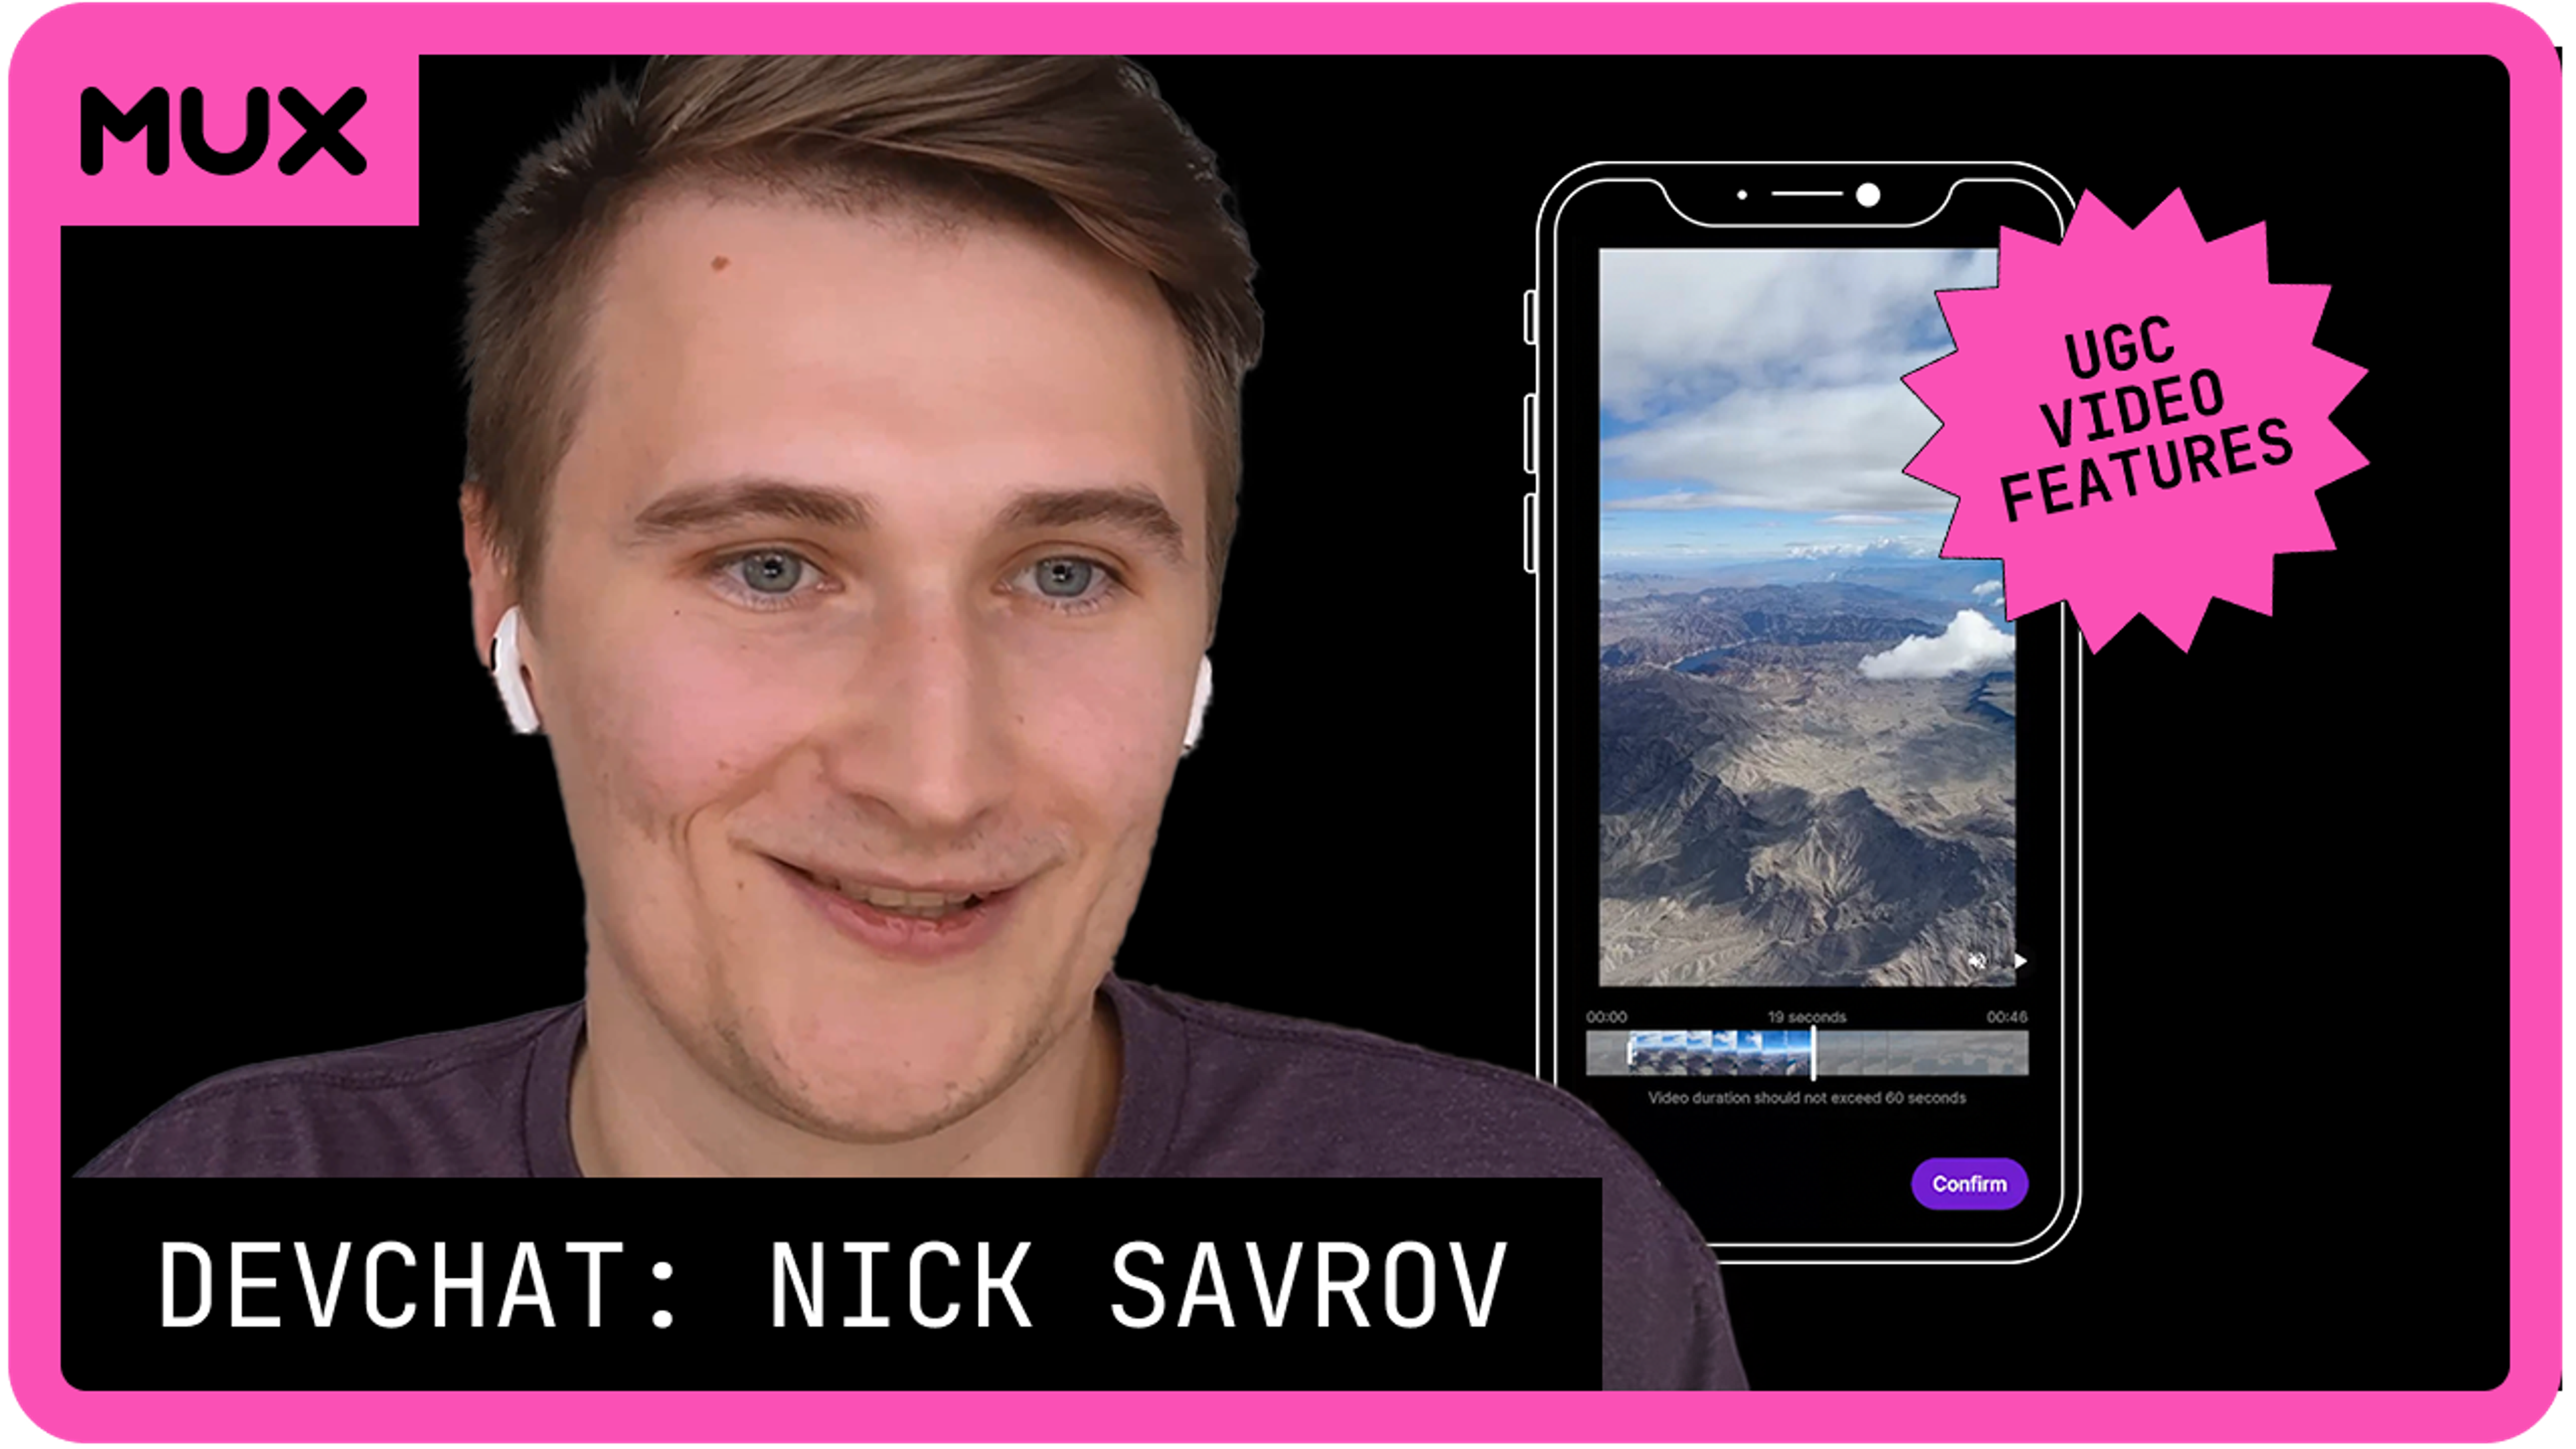 Image of Nick from Uscreen with a phone showing a video editing experience and a all out to UCG video features on the phone. Below his image it says Devchat: Nick Savrov. The Mux logo is in the upper left.